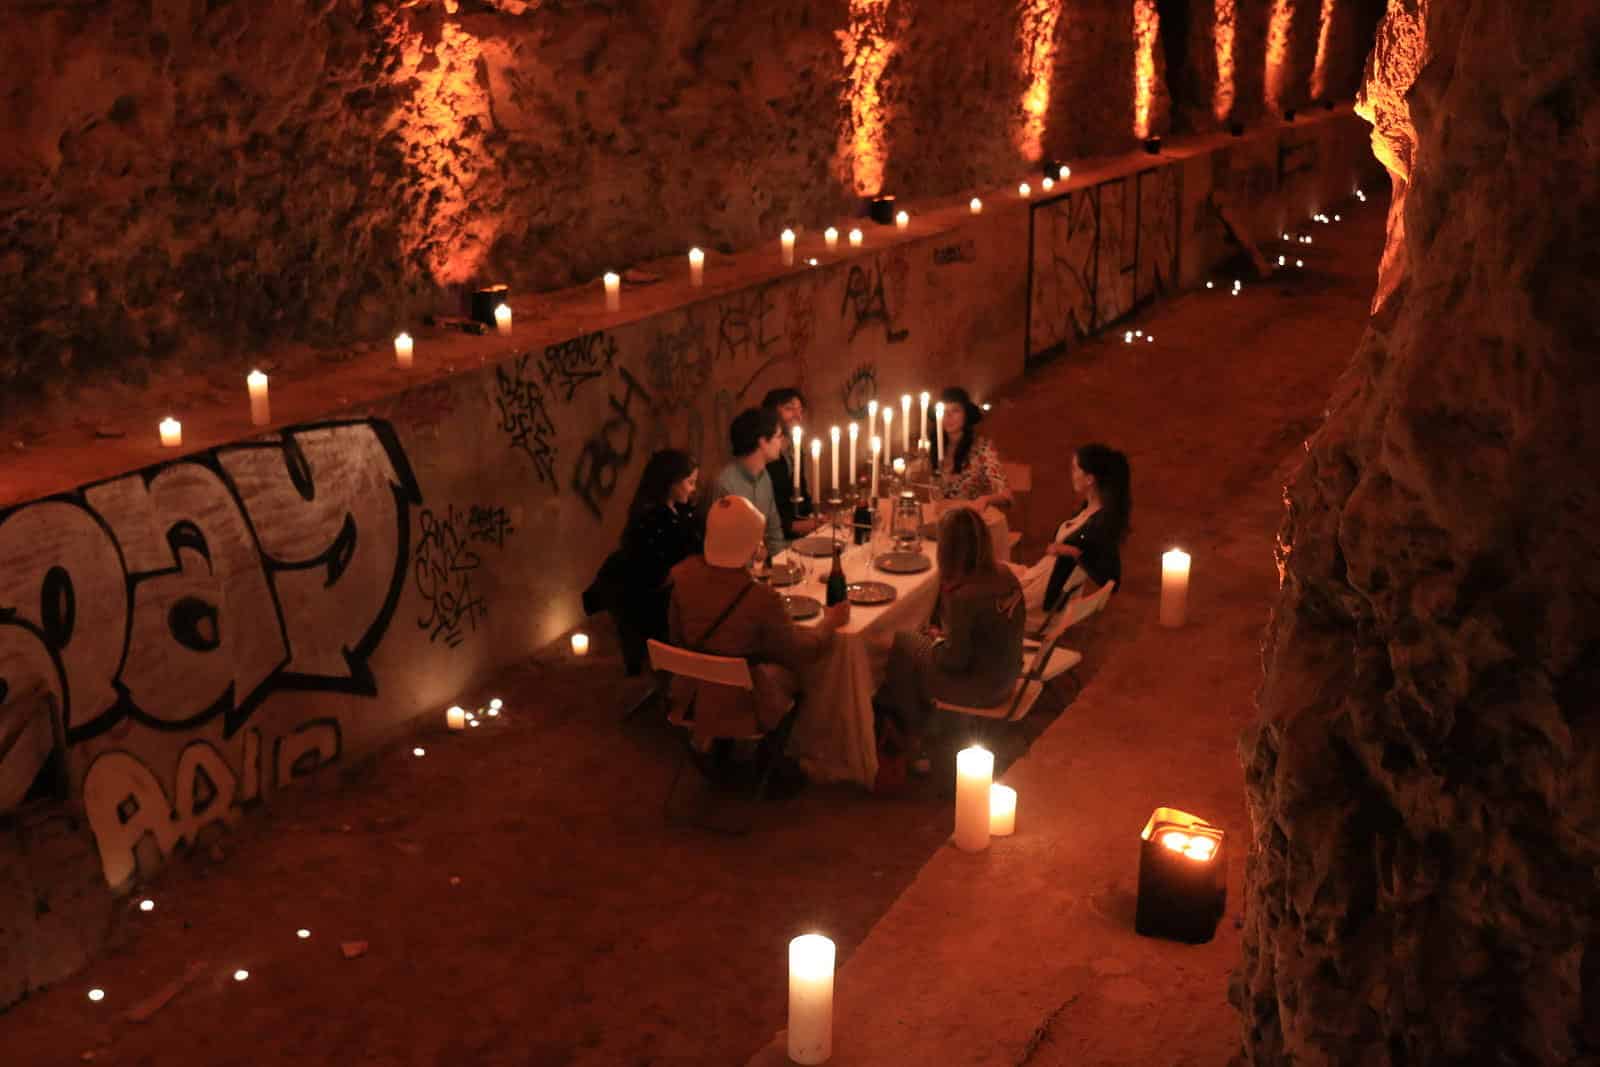 diner-aux-chandelles-bougies-ancien-bunker-nazi-urbex-insolite-inedit-messy-nessy-chic-dejeuner-dans-un-bunker-agence-wato-we-are-the-oracle-events